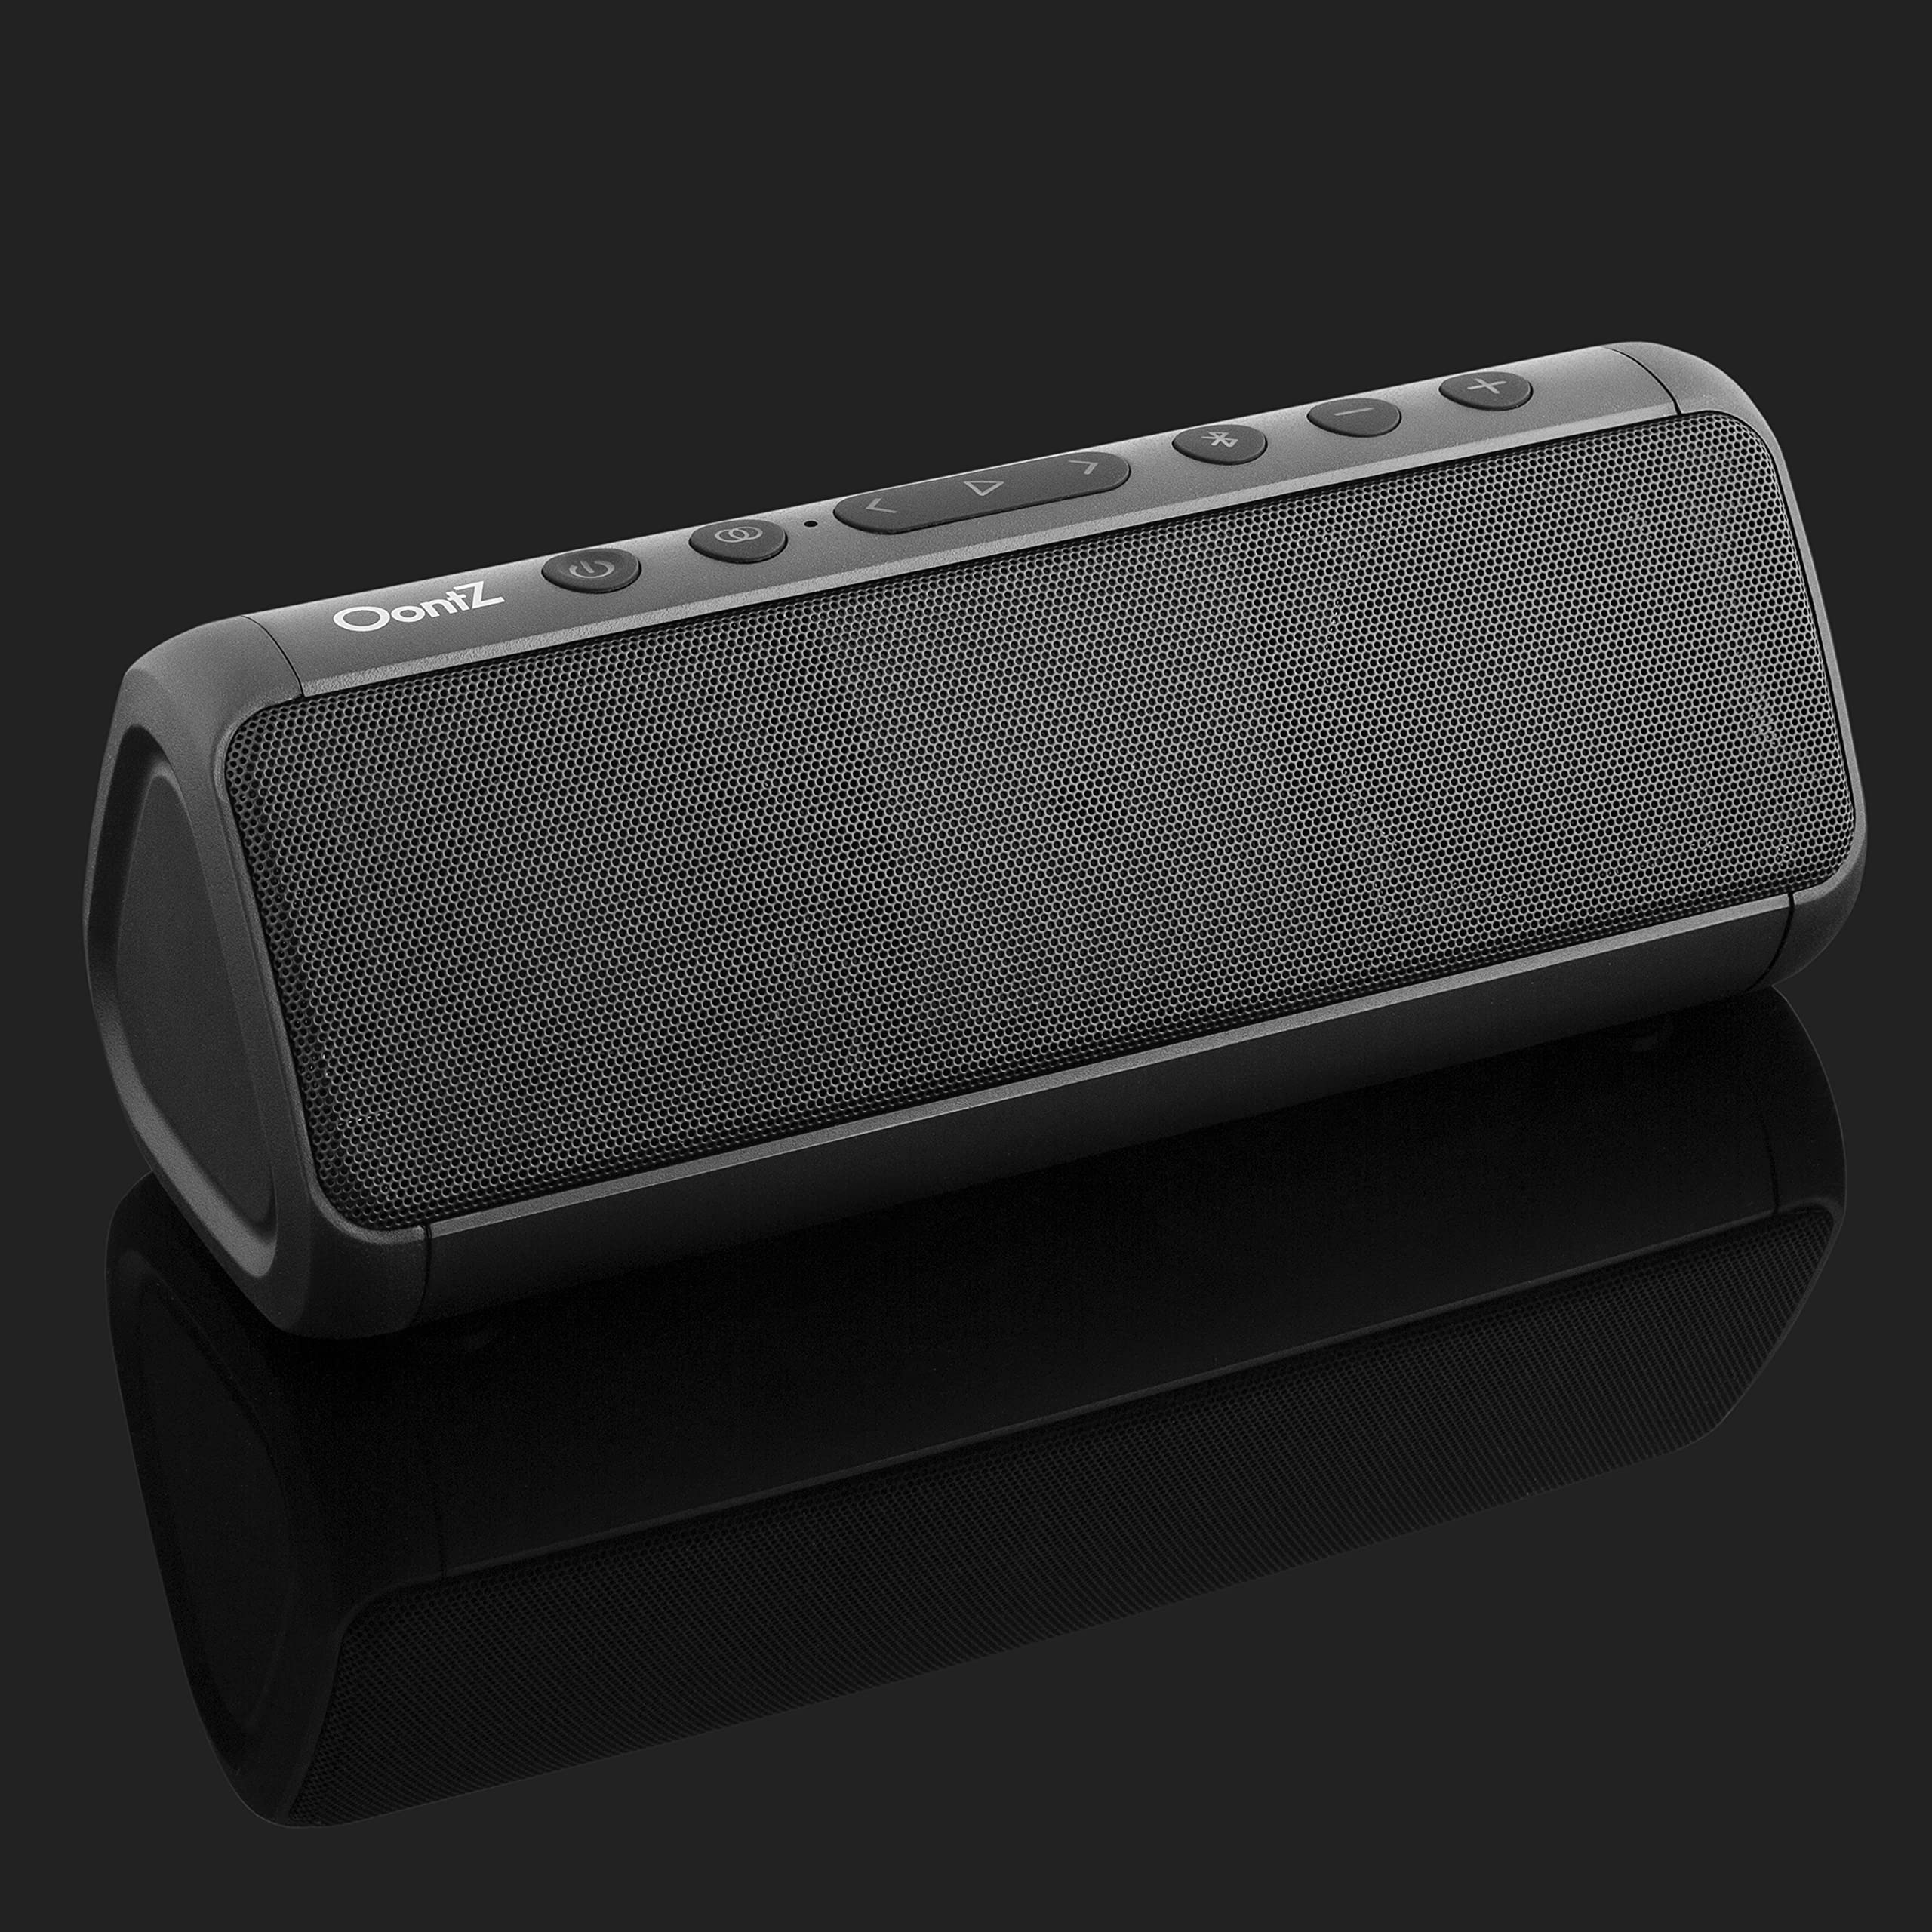 OontZ Pro Bluetooth Speaker, Premium Portable IPX7 Waterproof Wireless Speaker, Long Battery Playtime up to 15 hrs, Rich Bass, Crystal Clear Stereo Sound with Aux Input (Black)